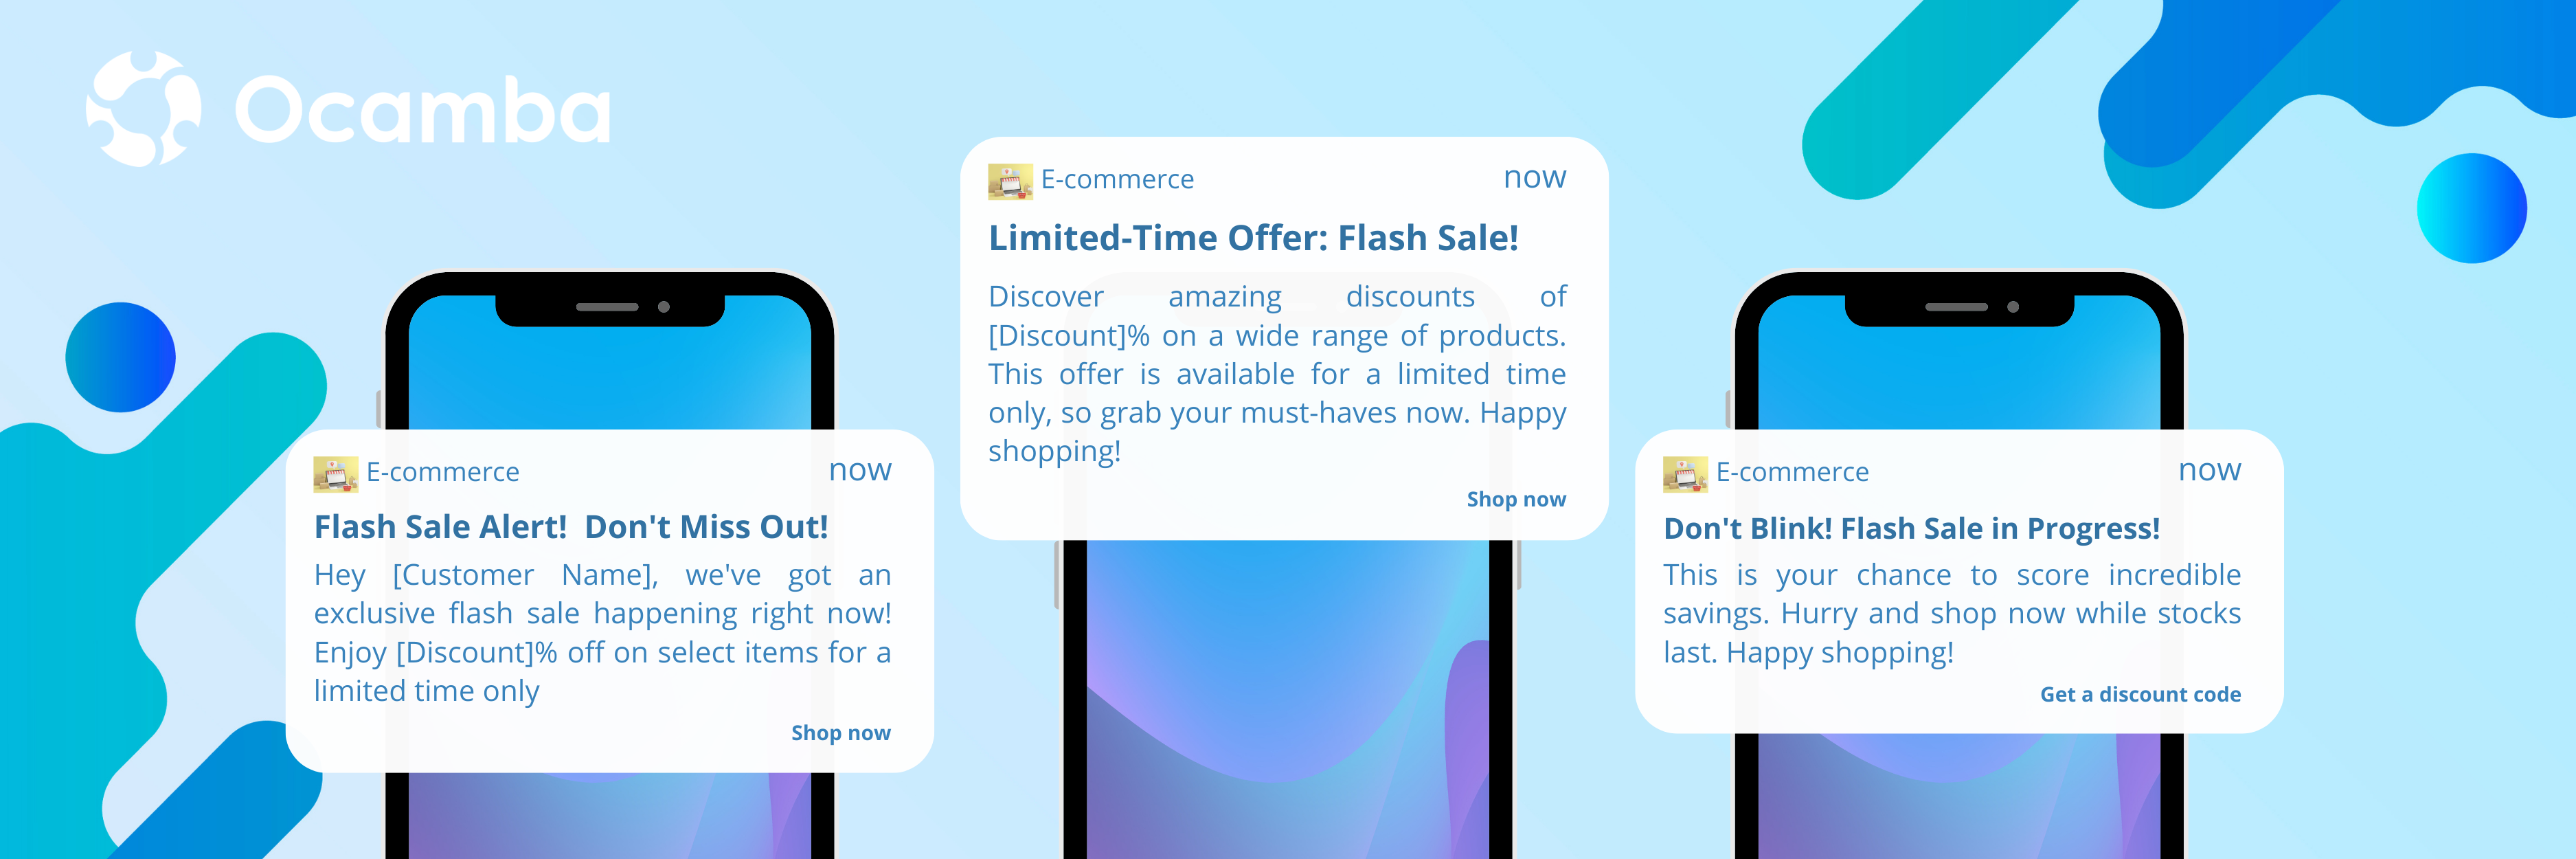 Ecommerce push notifications templates for flash sales